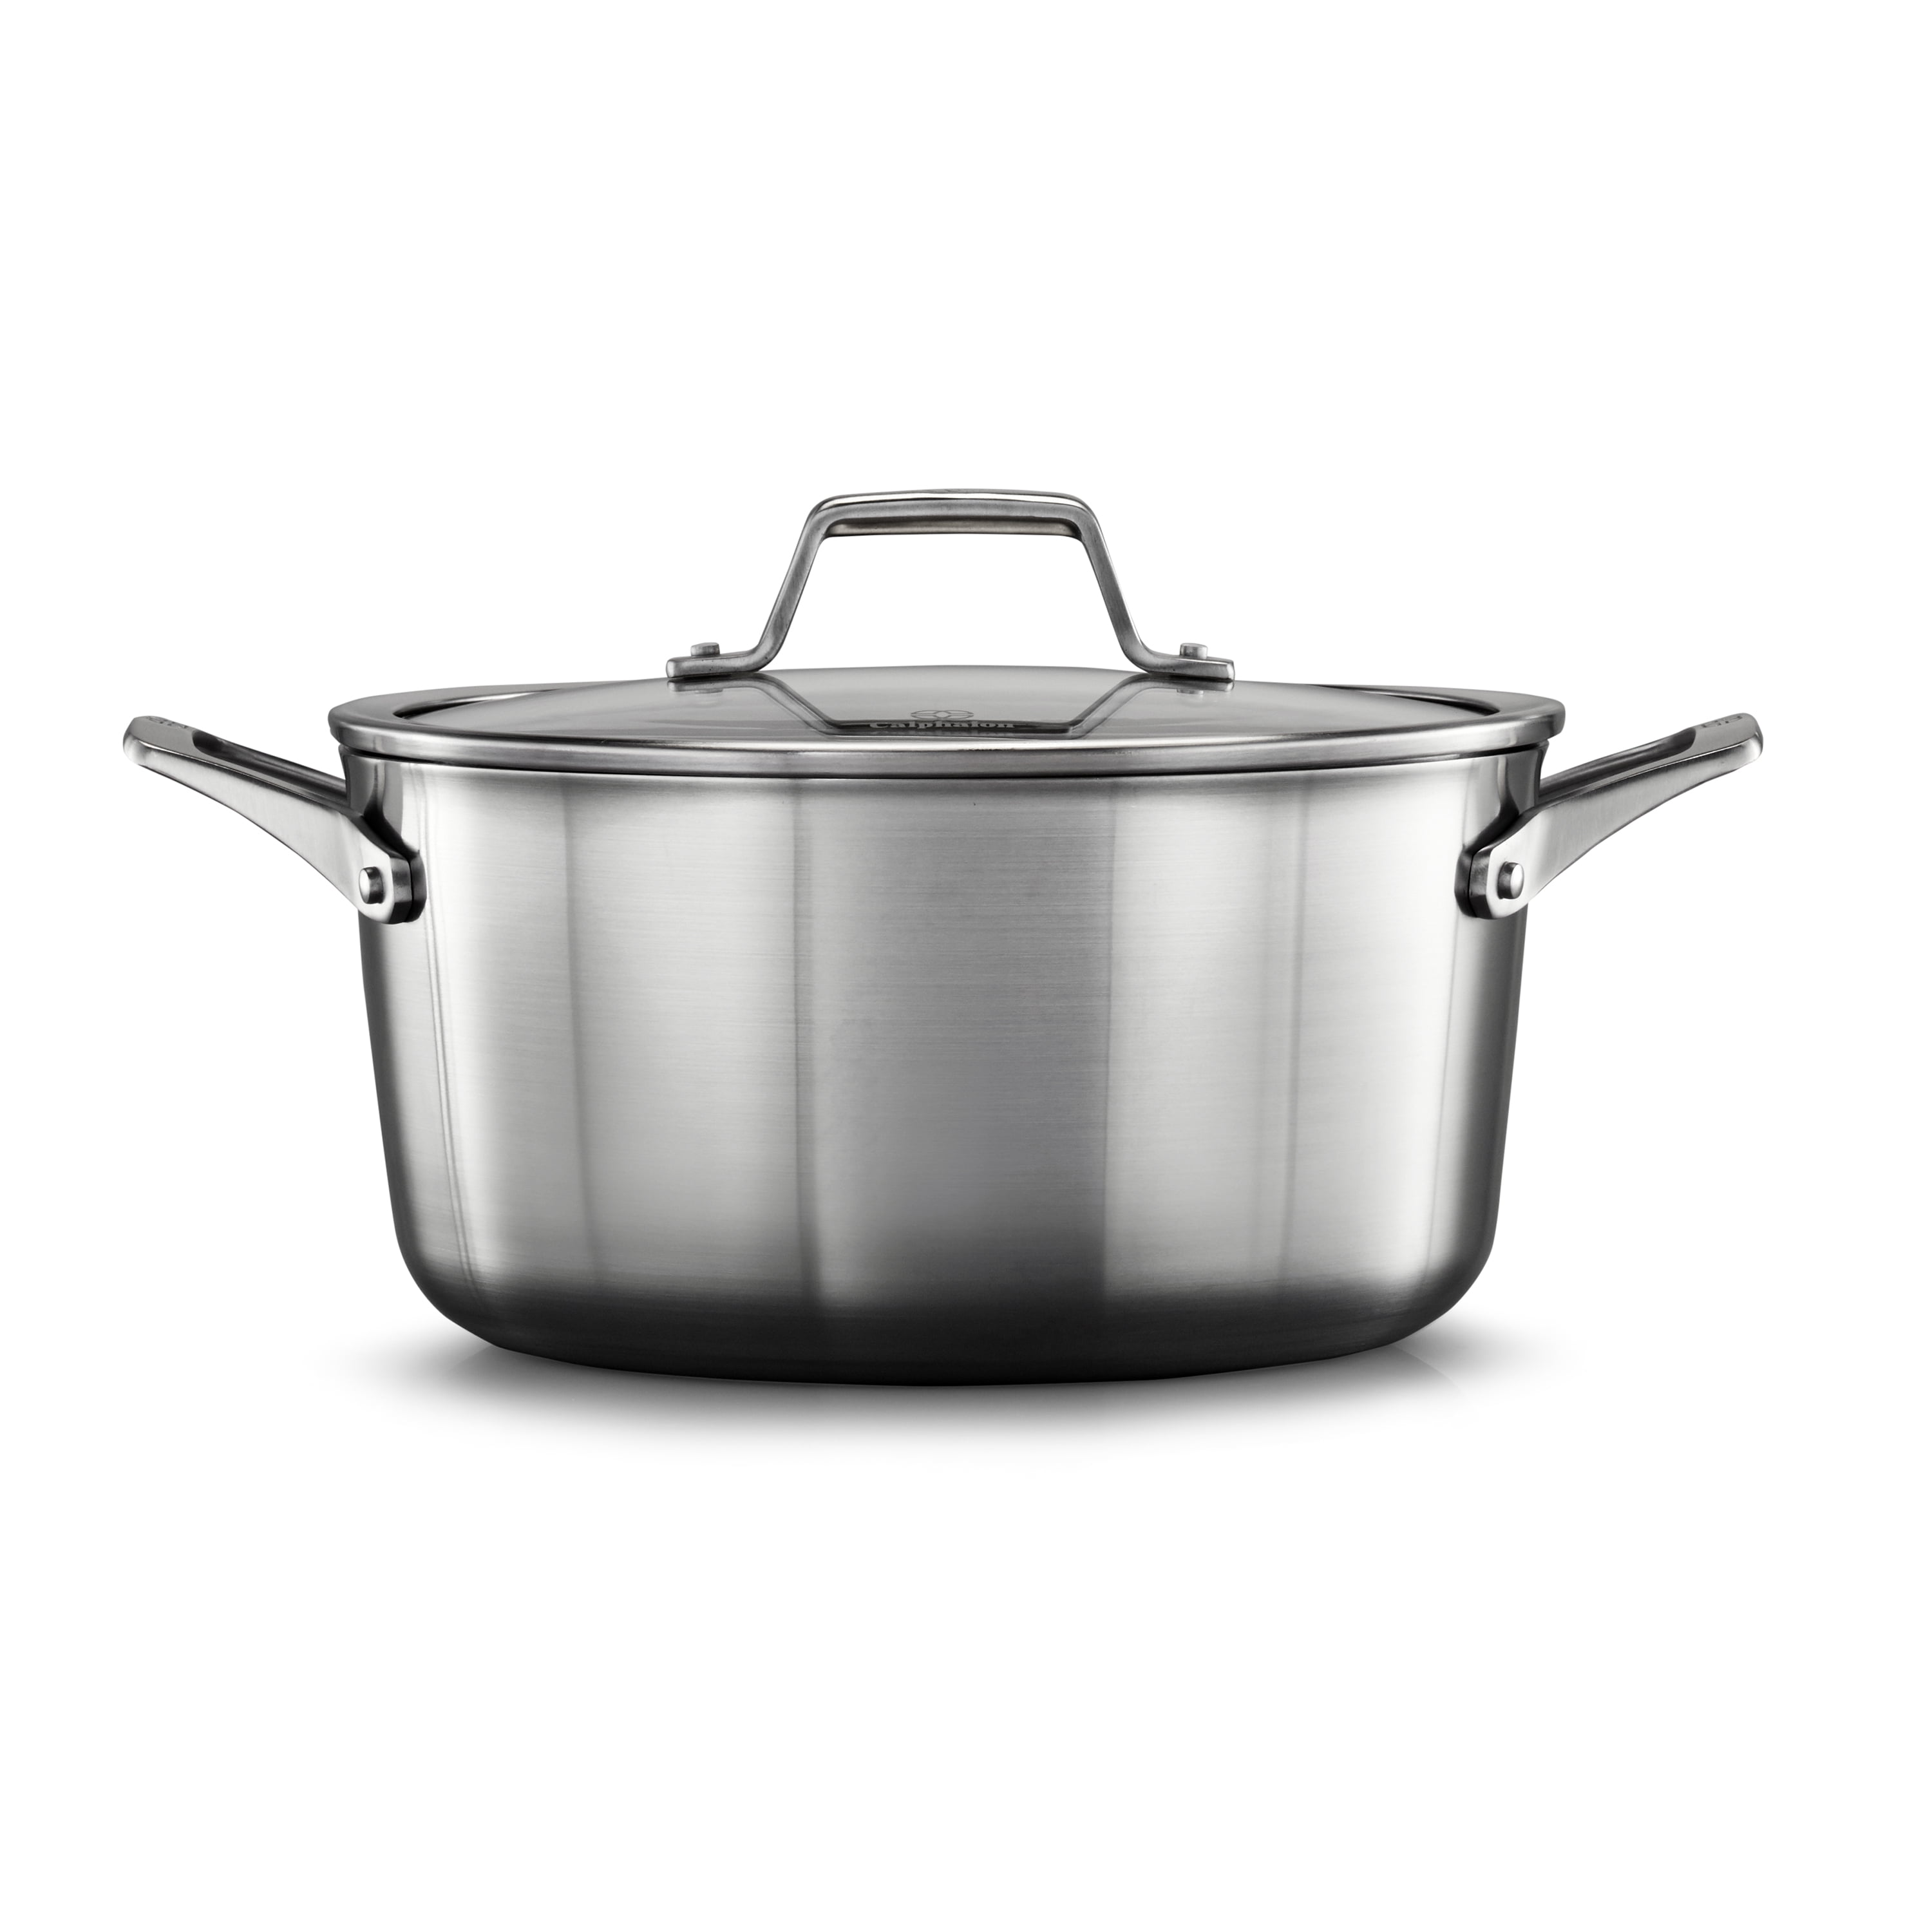 Calphalon Premier Stainless Steel 6-Quart Stock Pot with Cover 6 Qt Stainless Steel Pot